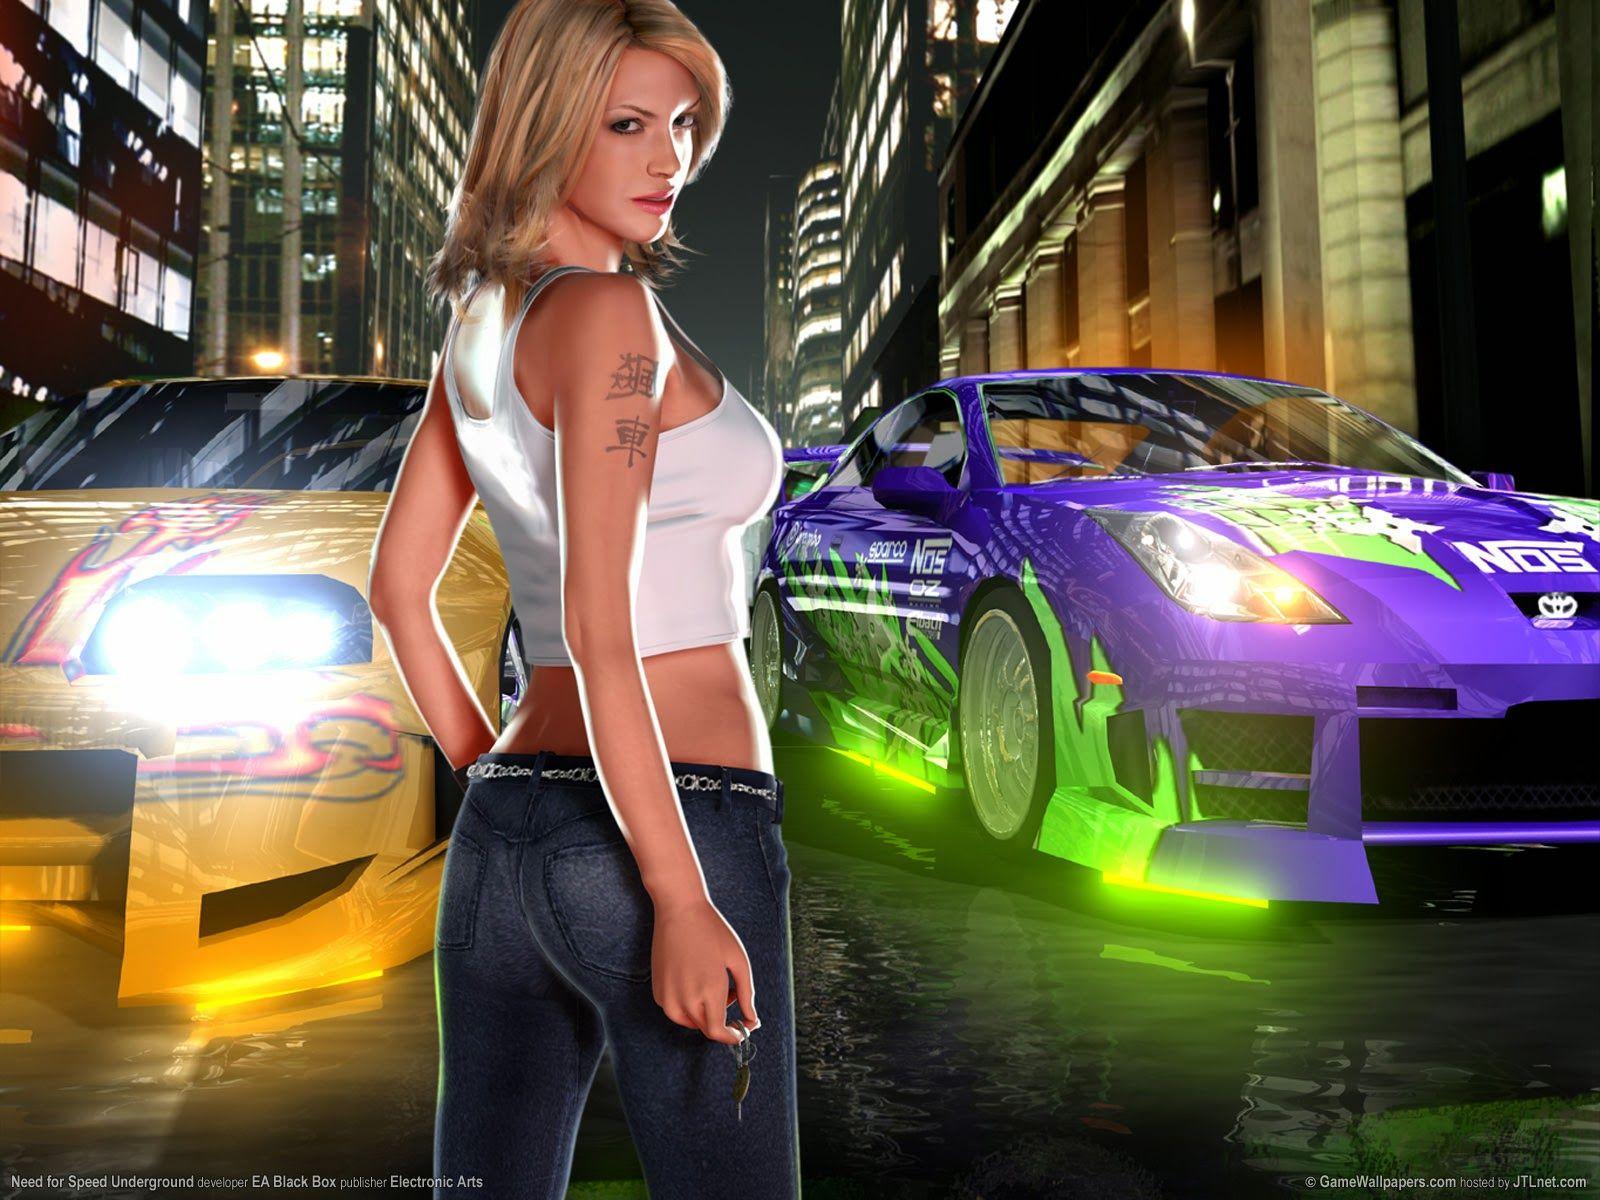 information of need for speed 2 movie